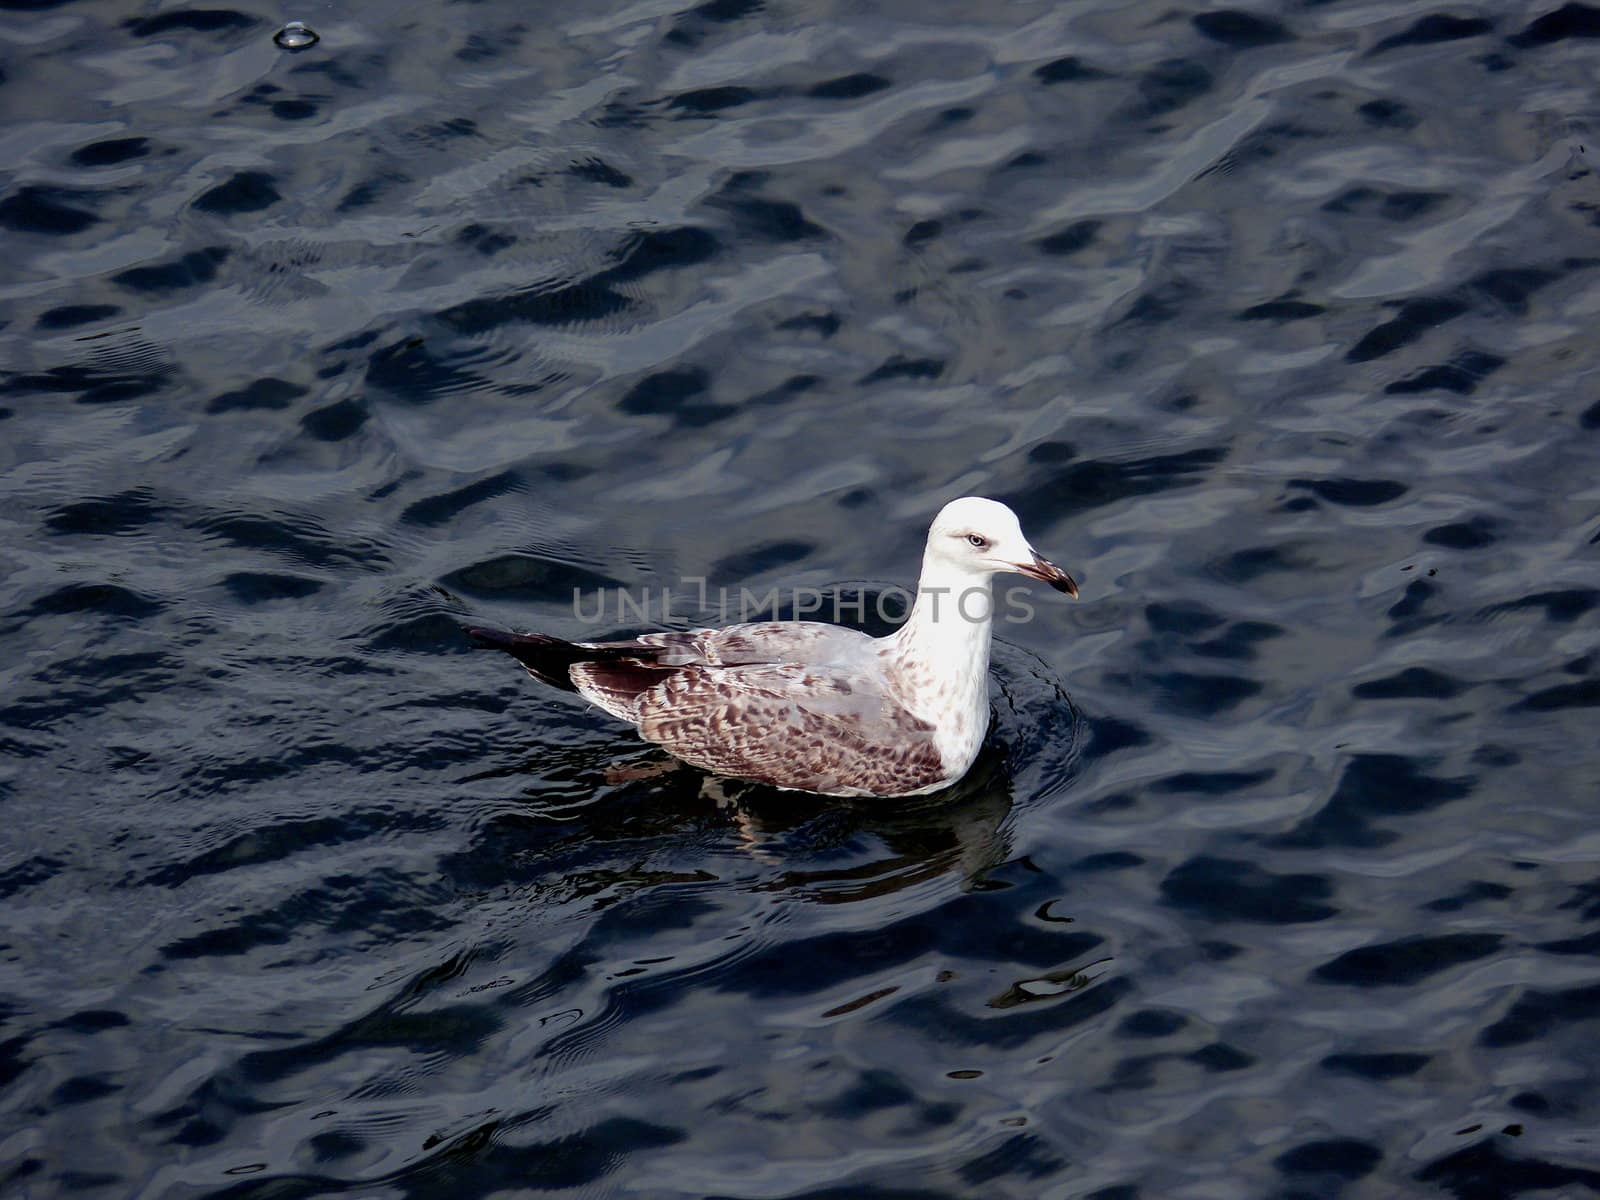 Gull in the water